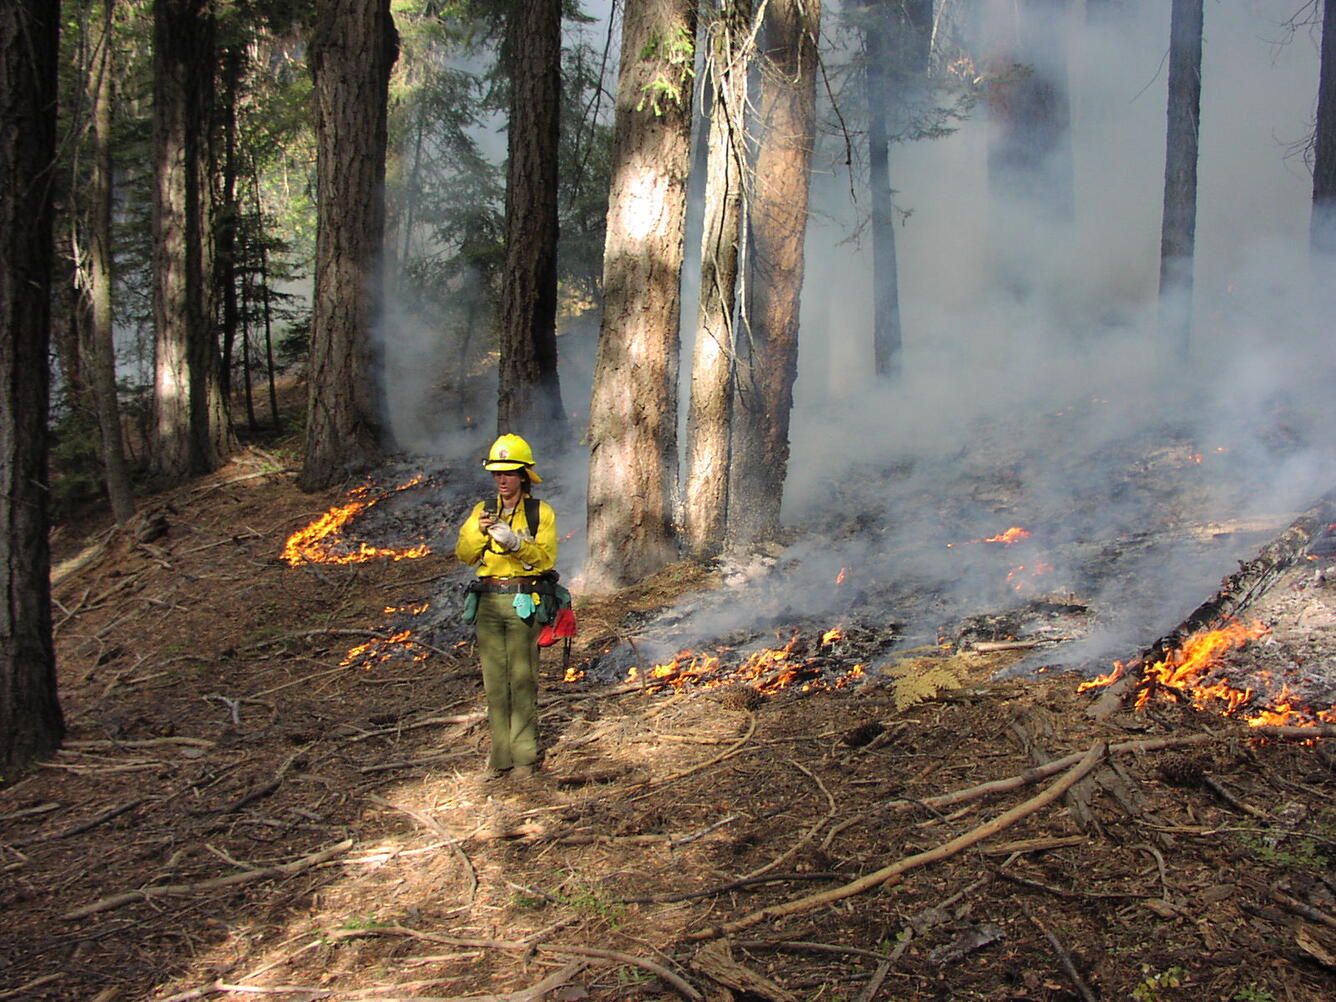 Studies on tree mortality can help forest managers determine the suitability of prescribed fire to manage forests of different s